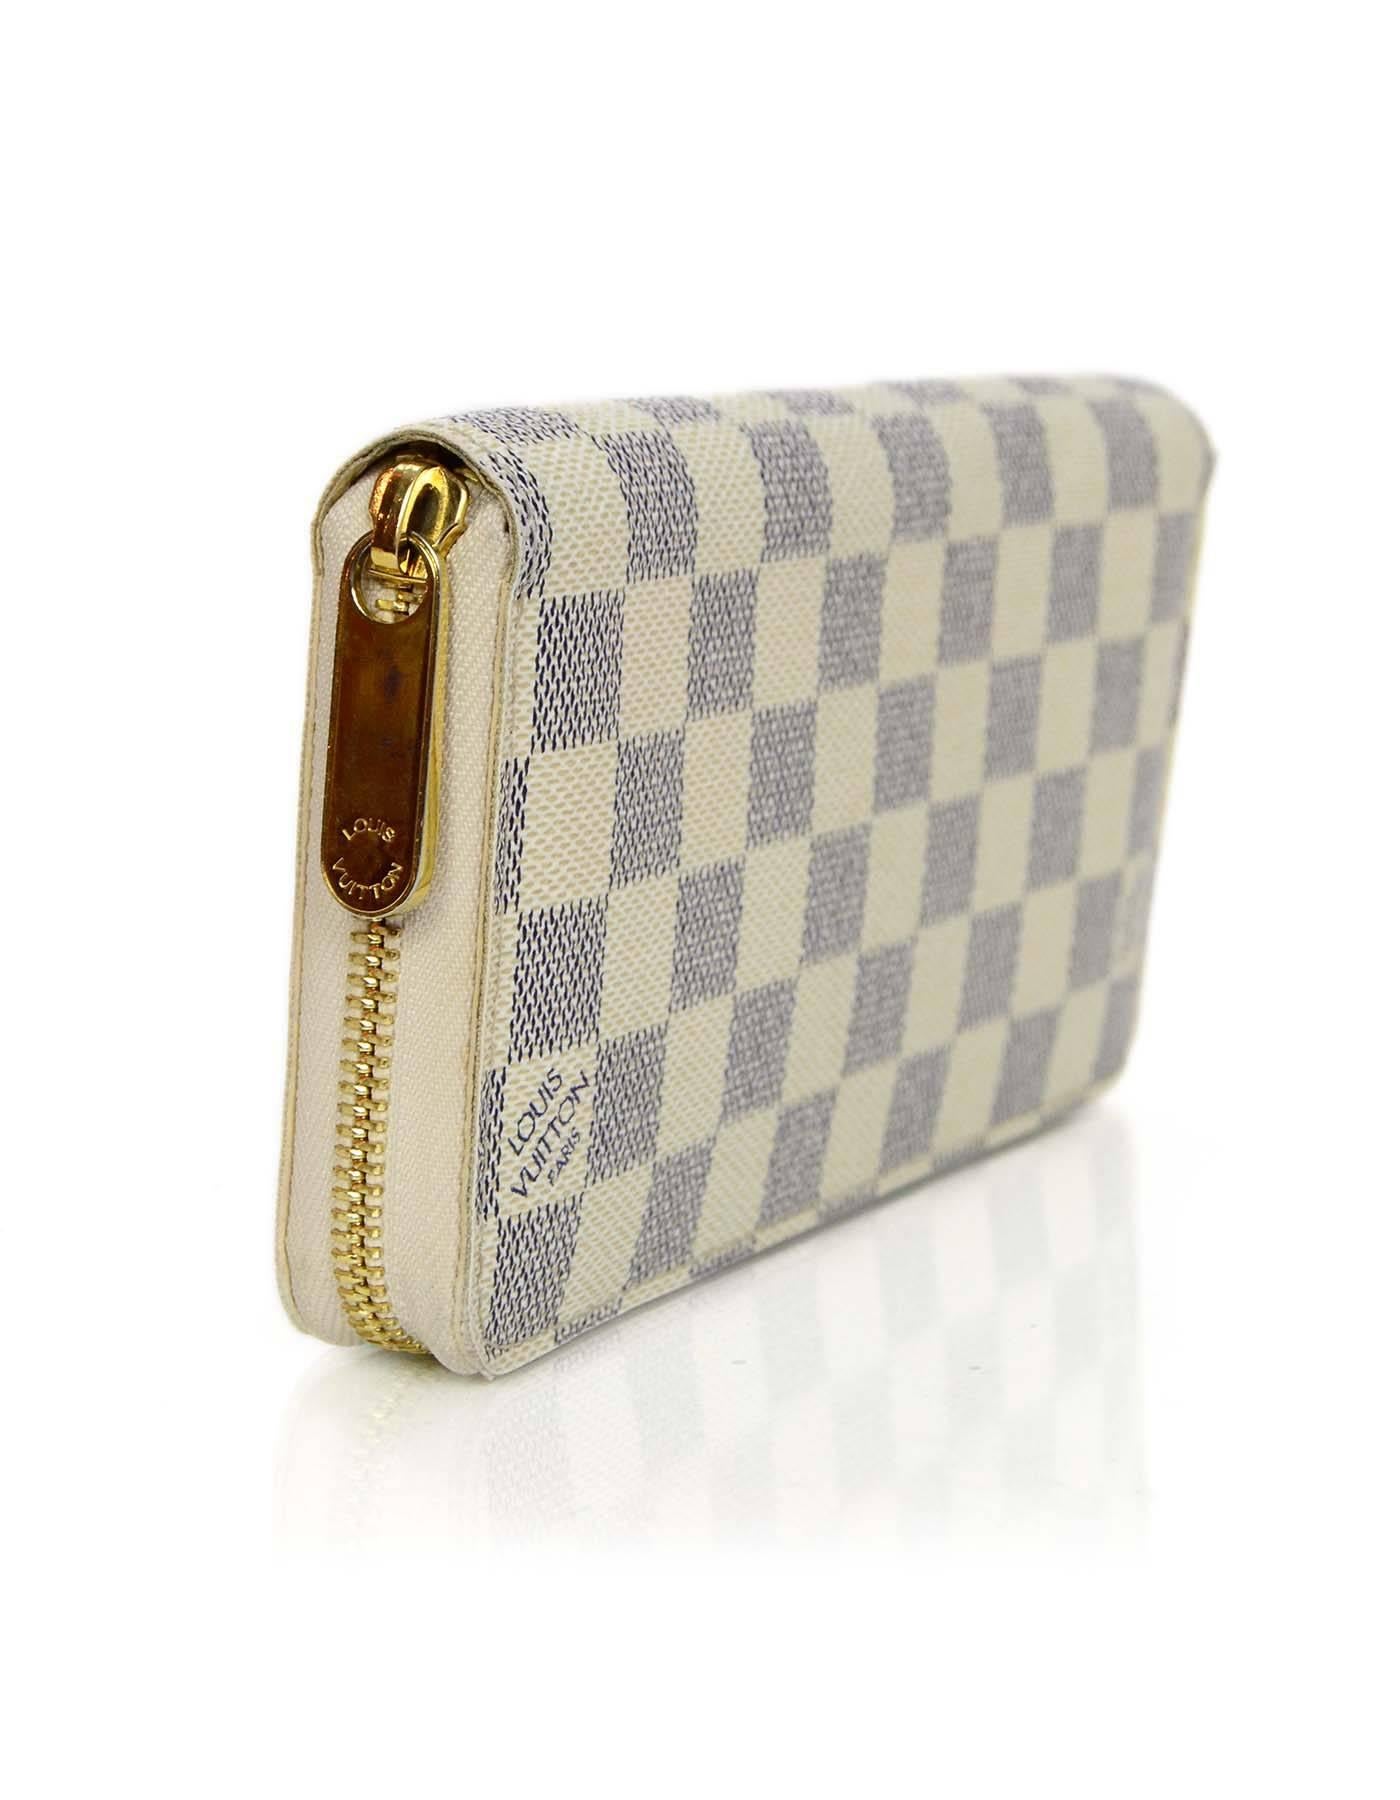 Louis Vuitton Damier Azur Zippy Wallet

Made In: Spain
Color: Blue and cream
Hardware: Goldtone
Materials: Coated canvas and metal
Year of Production: 2009
Serial Number/Date Code: CA2029
Lining: Cream coated canvas
Closure/Opening: Zip